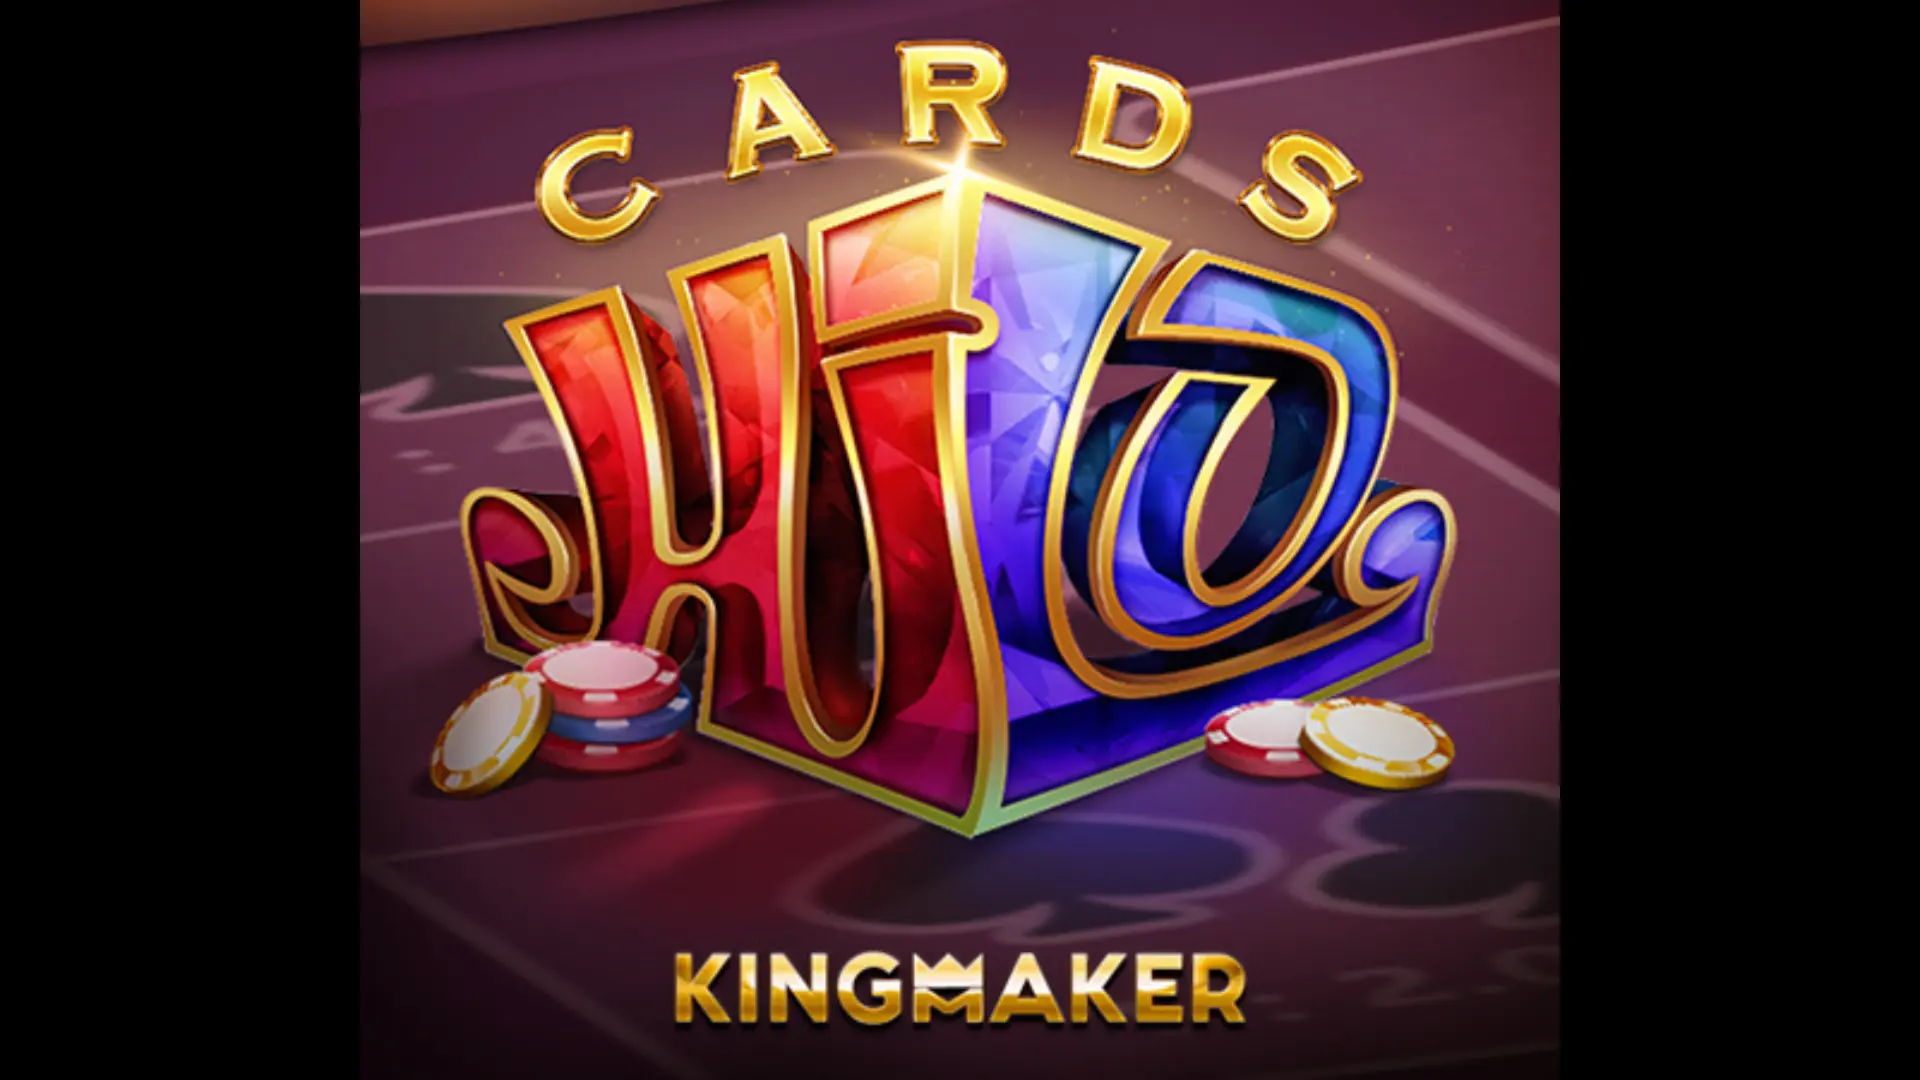 Cards Hi Lo by Kingmaker